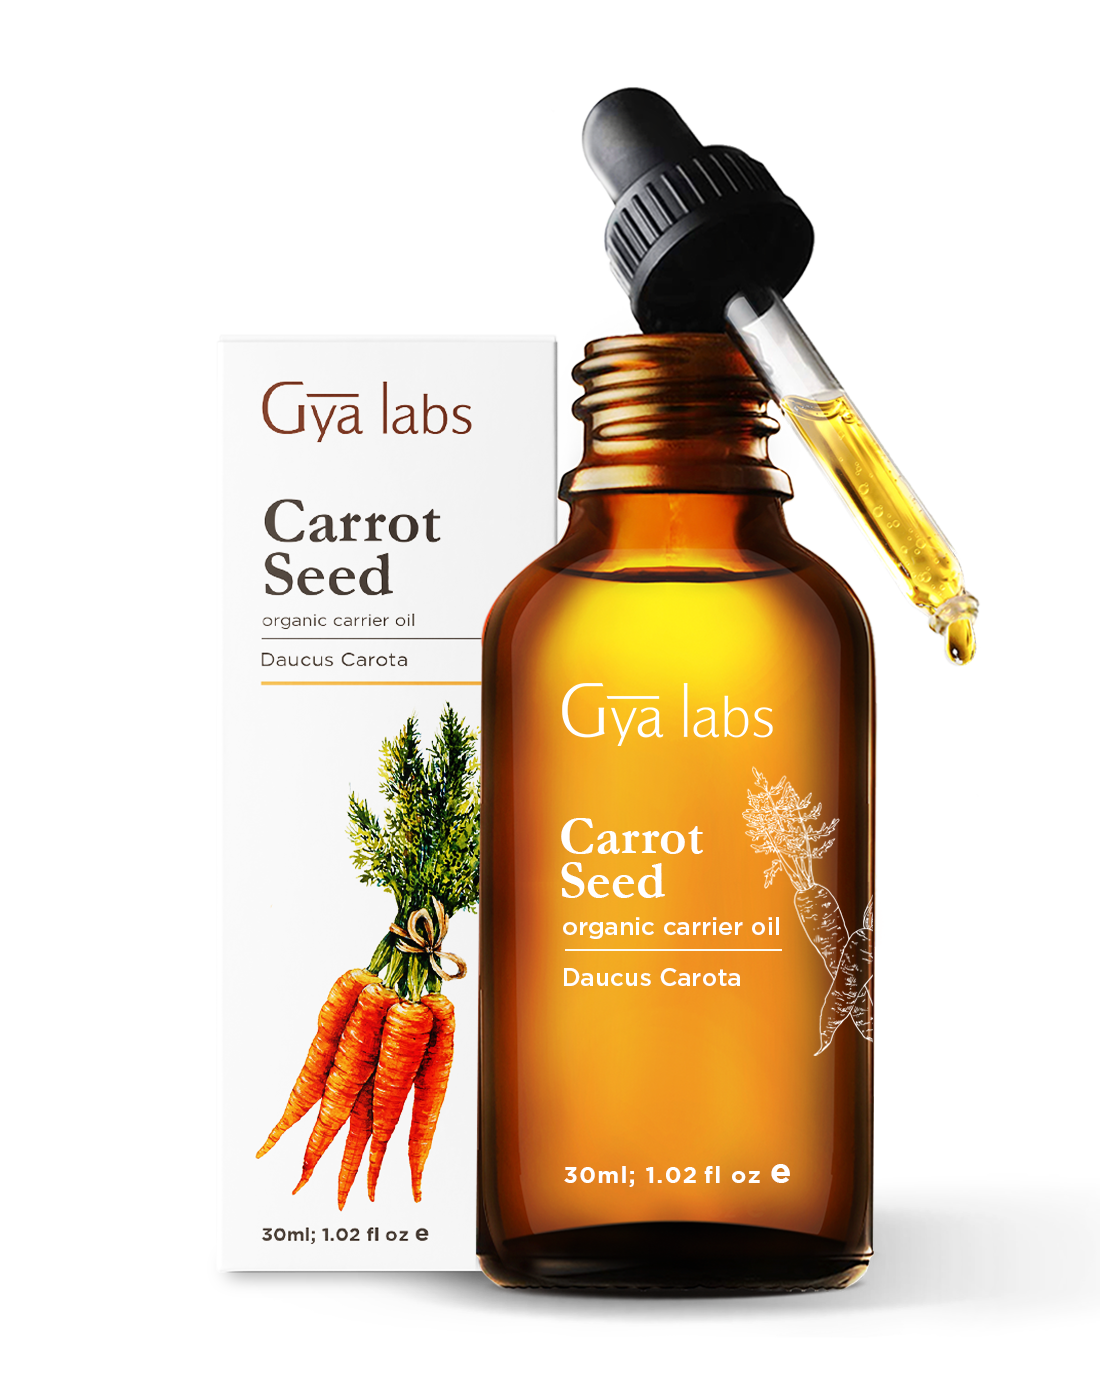 How Carrot Seed Oil Protects Your Skin from the Sun